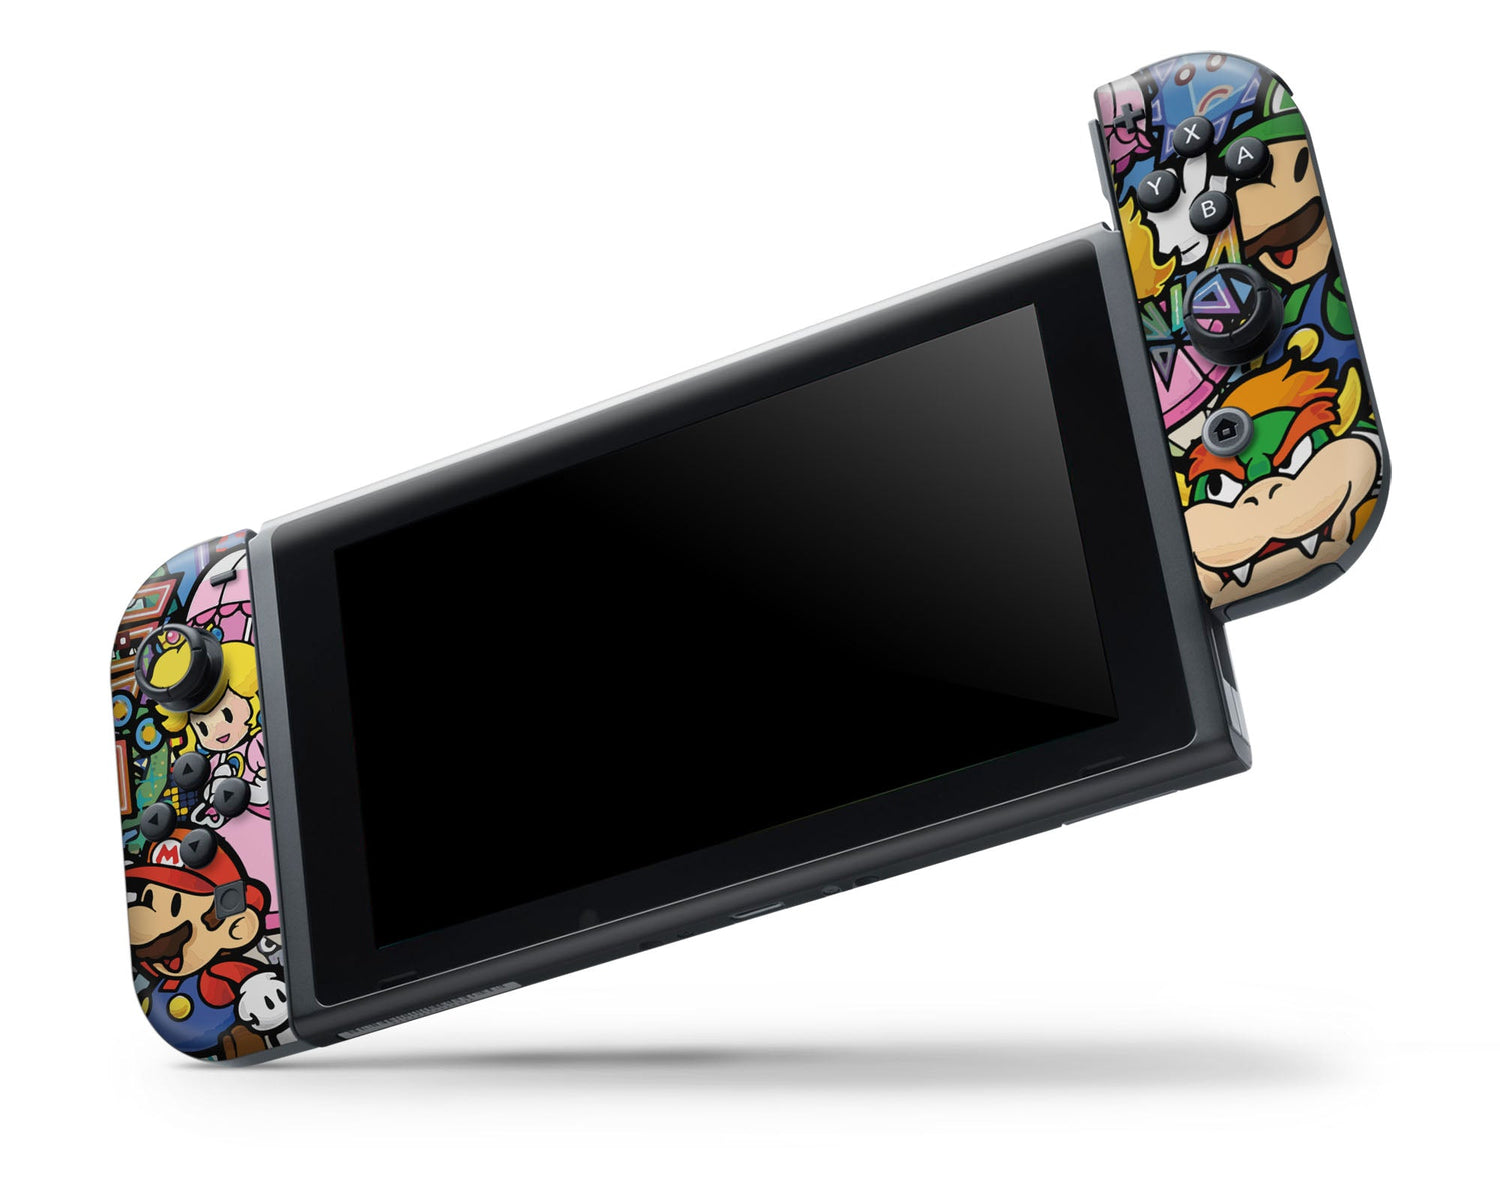 Lux Skins Nintendo Switch OLED Paper Mario Full Set +Tempered Glass Skins - Pop culture Mario Skin